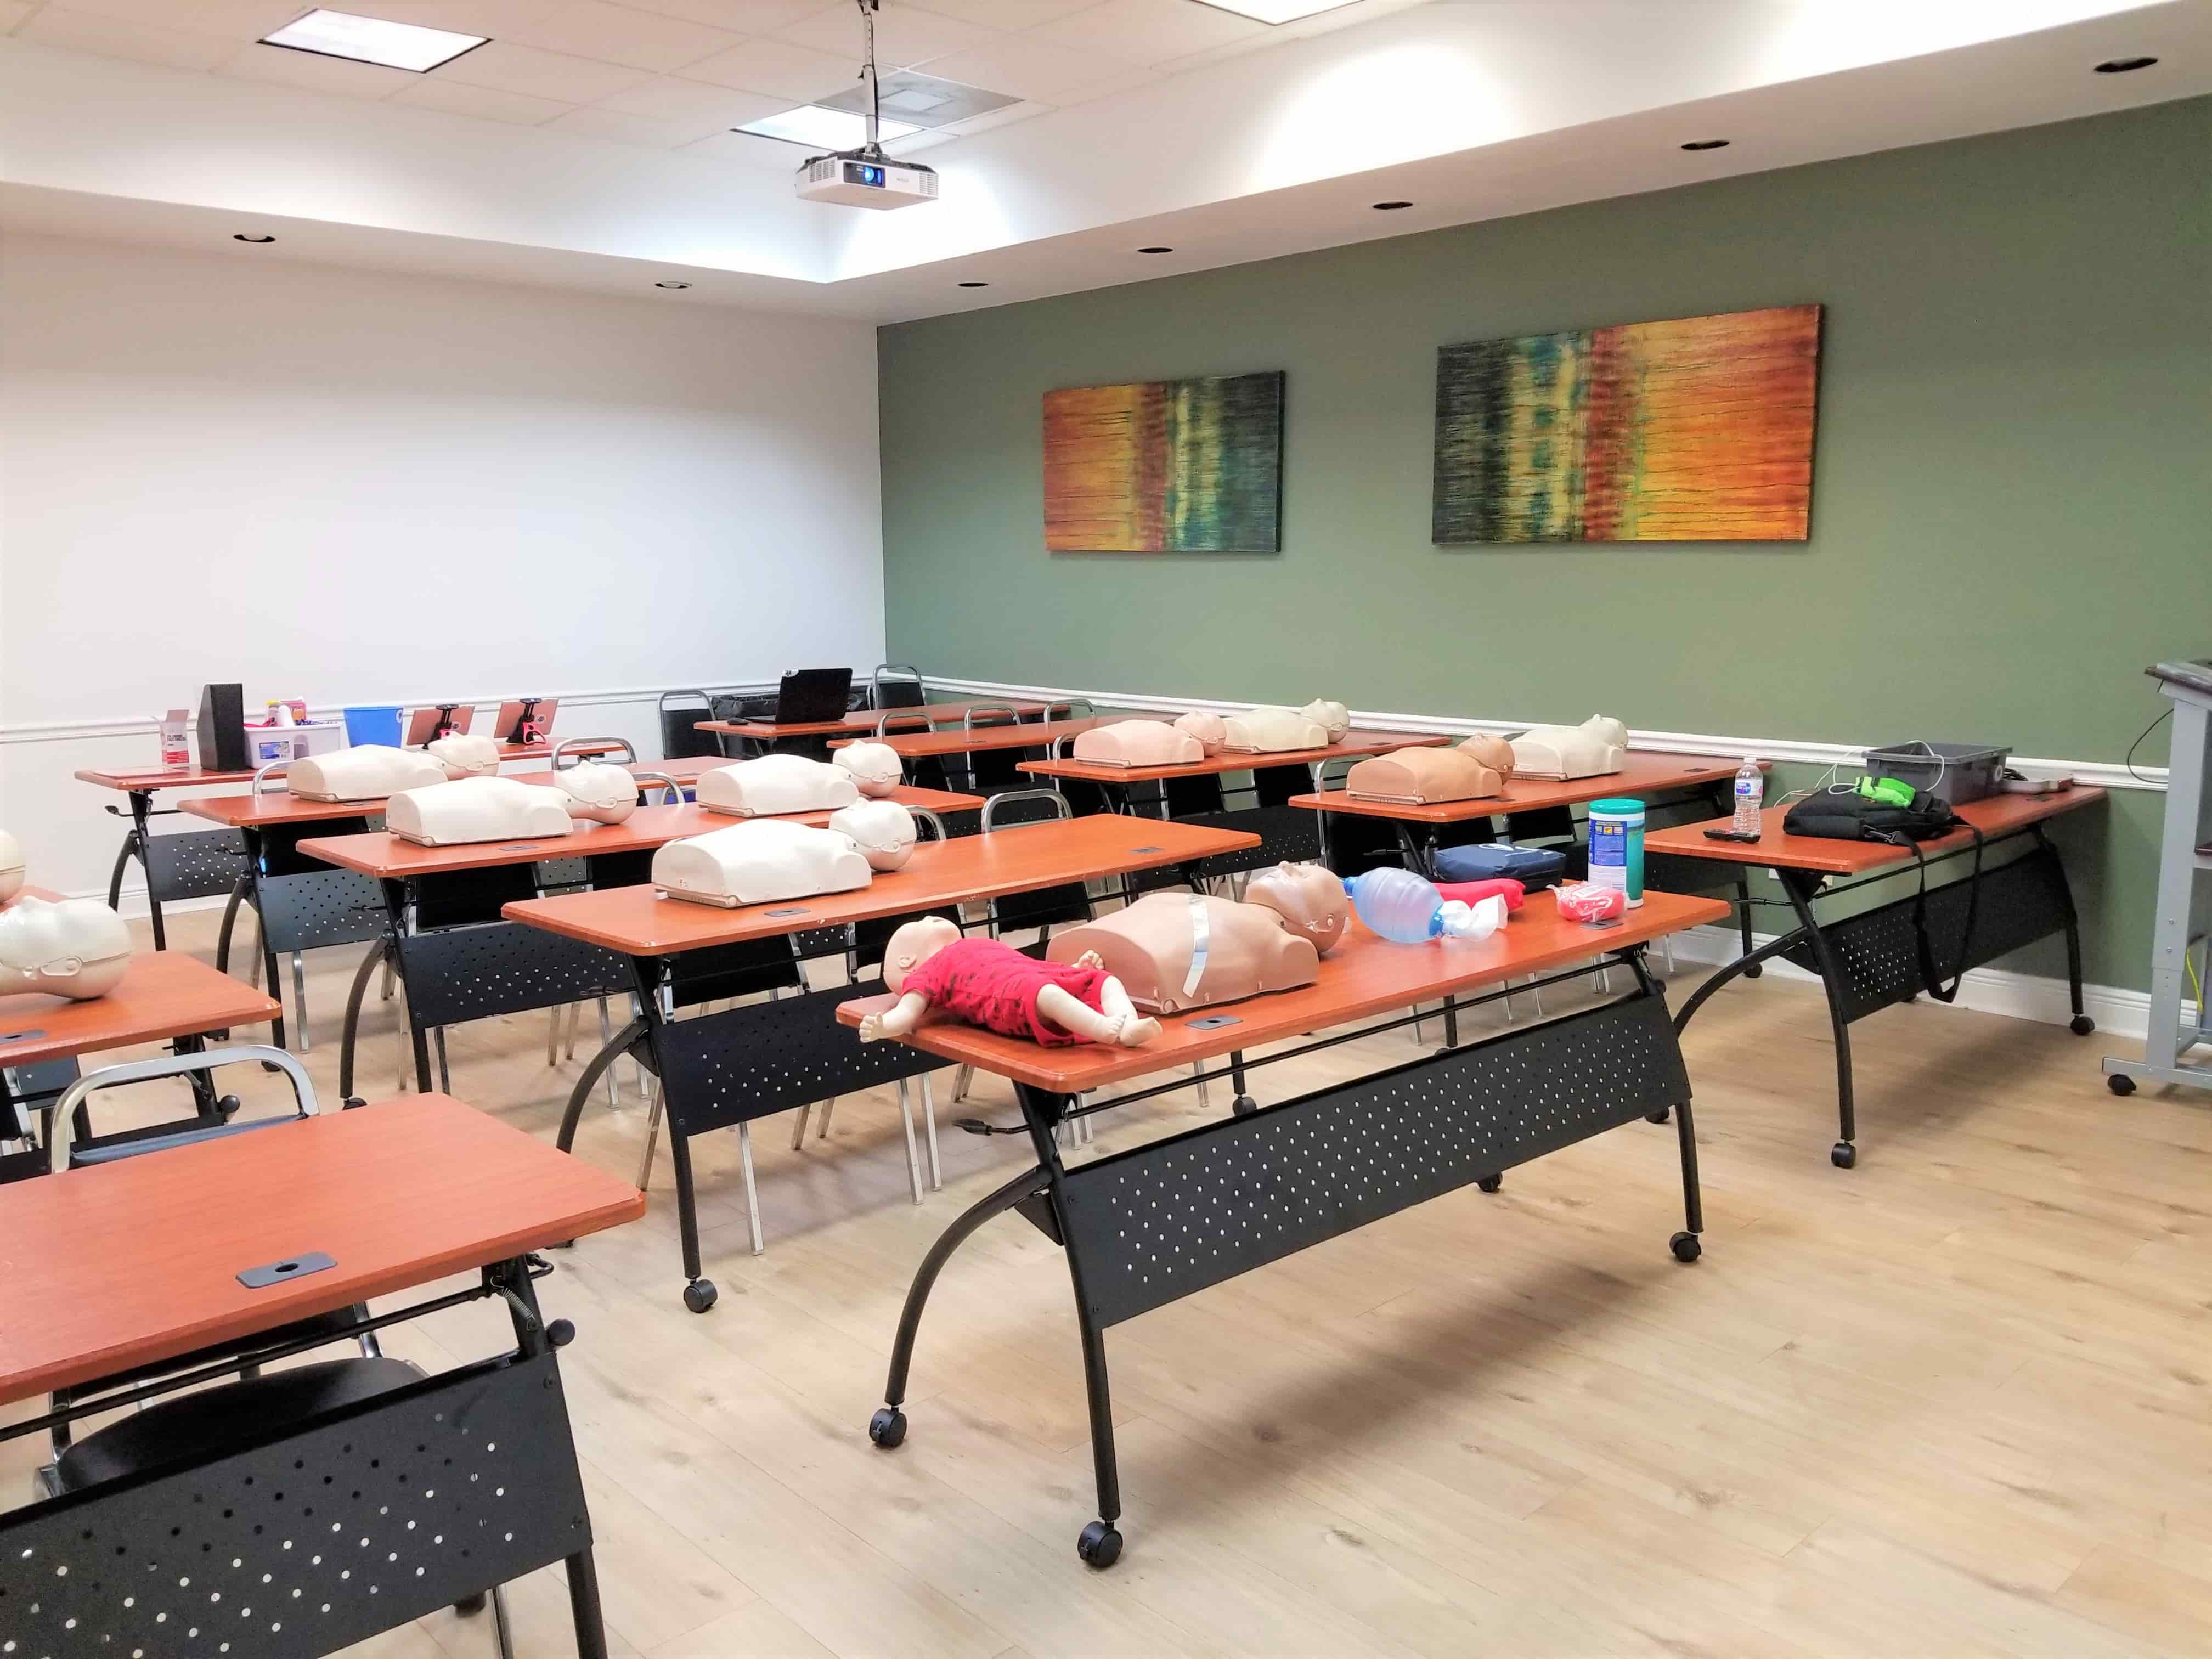 Delray Beach cpr bls certification classes